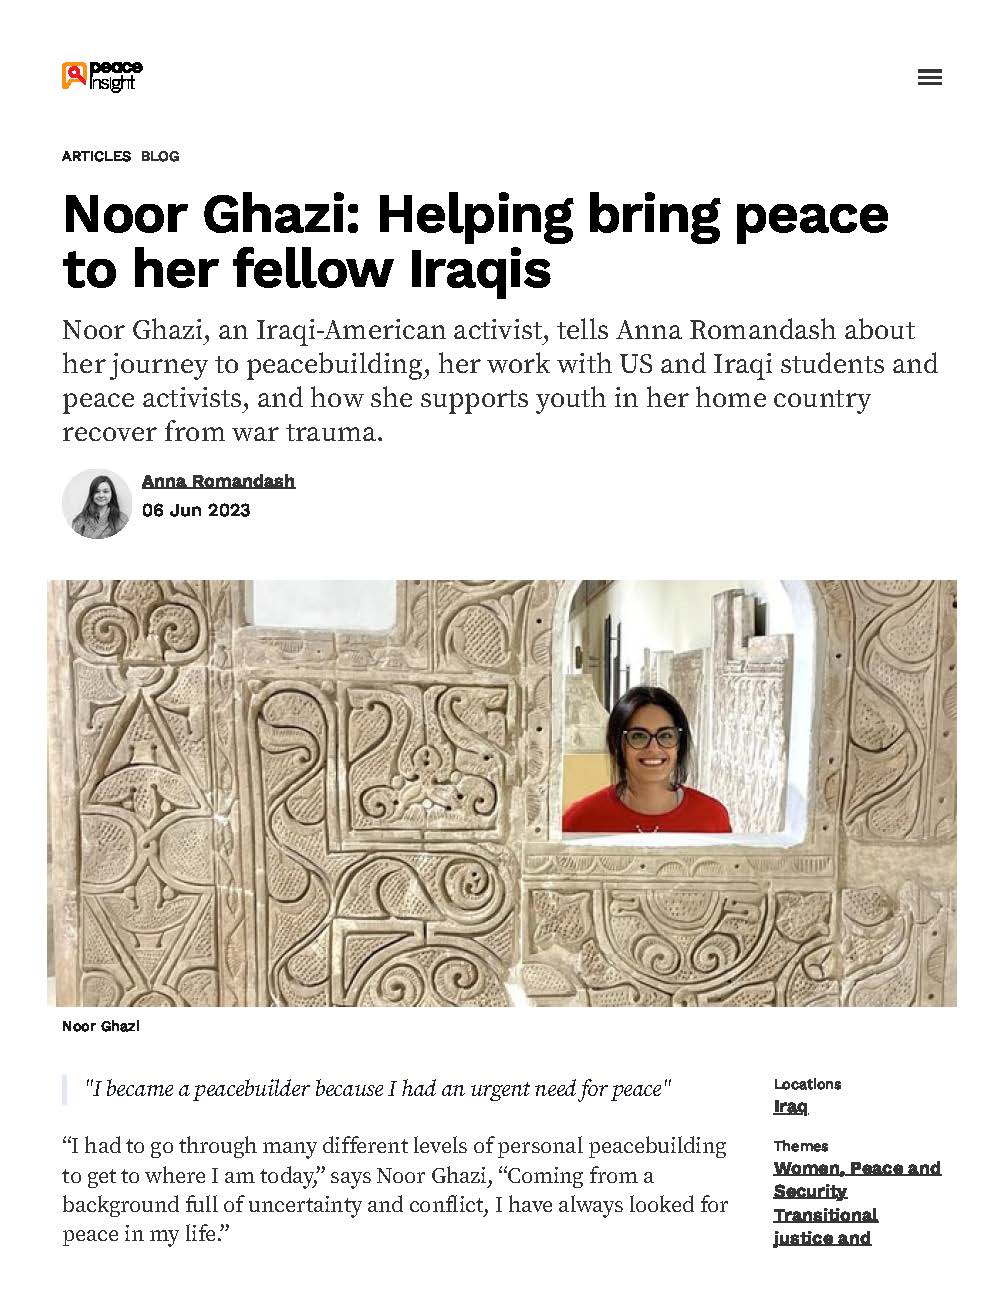 Noor Ghazi: Helping bring peace to her fellow Iraqis